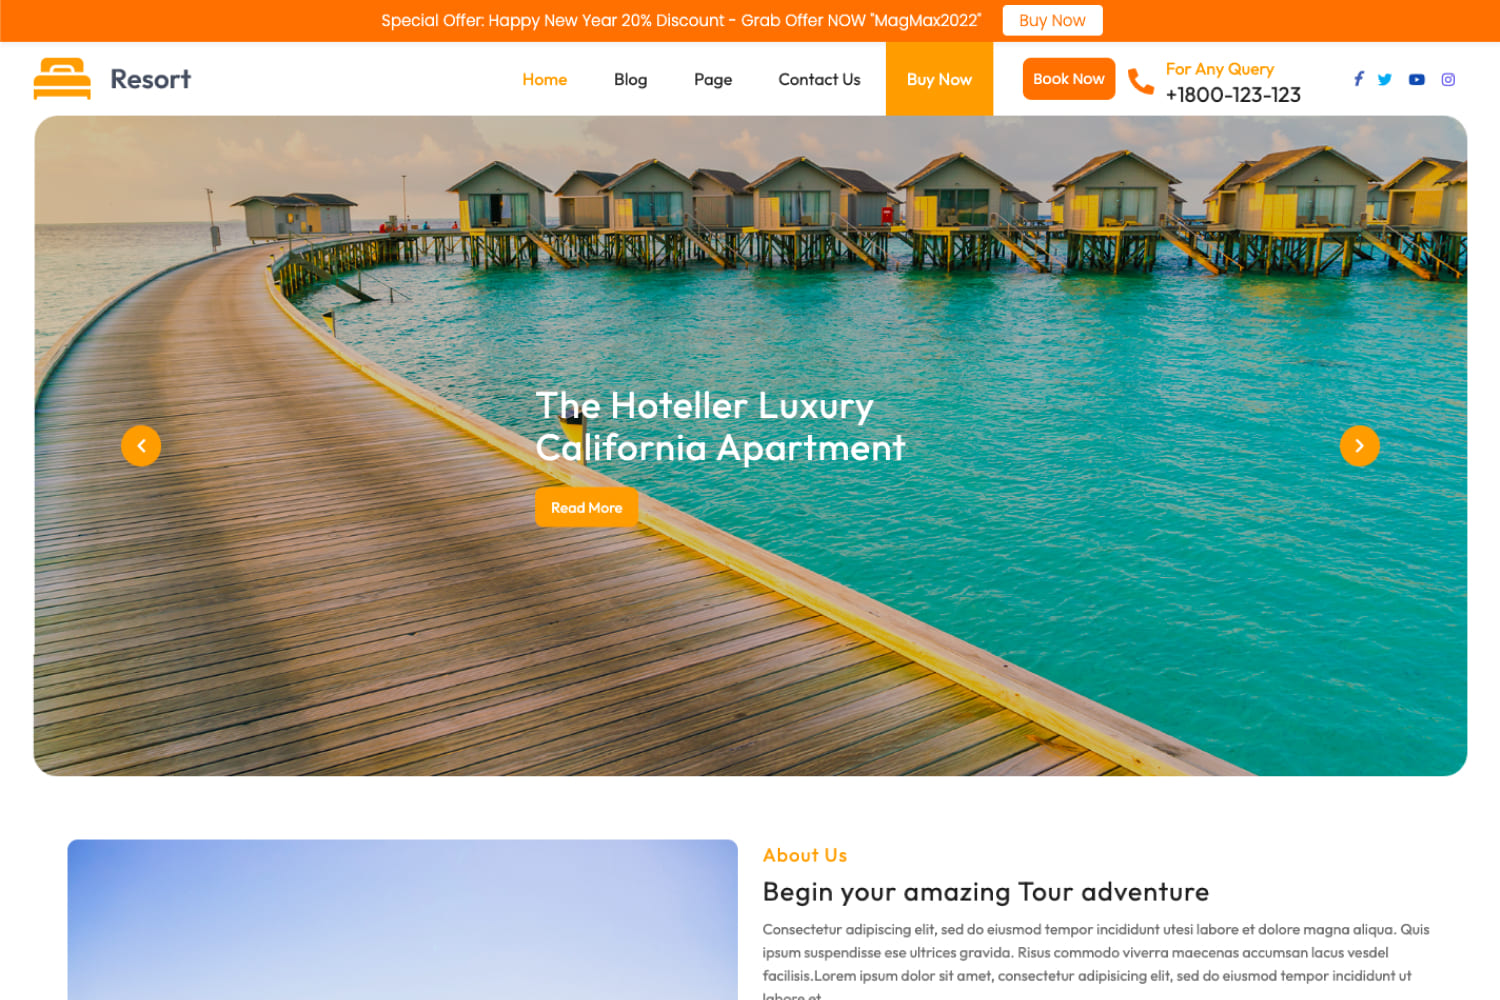 The main page of the hotel website with a photo of houses in the sea.